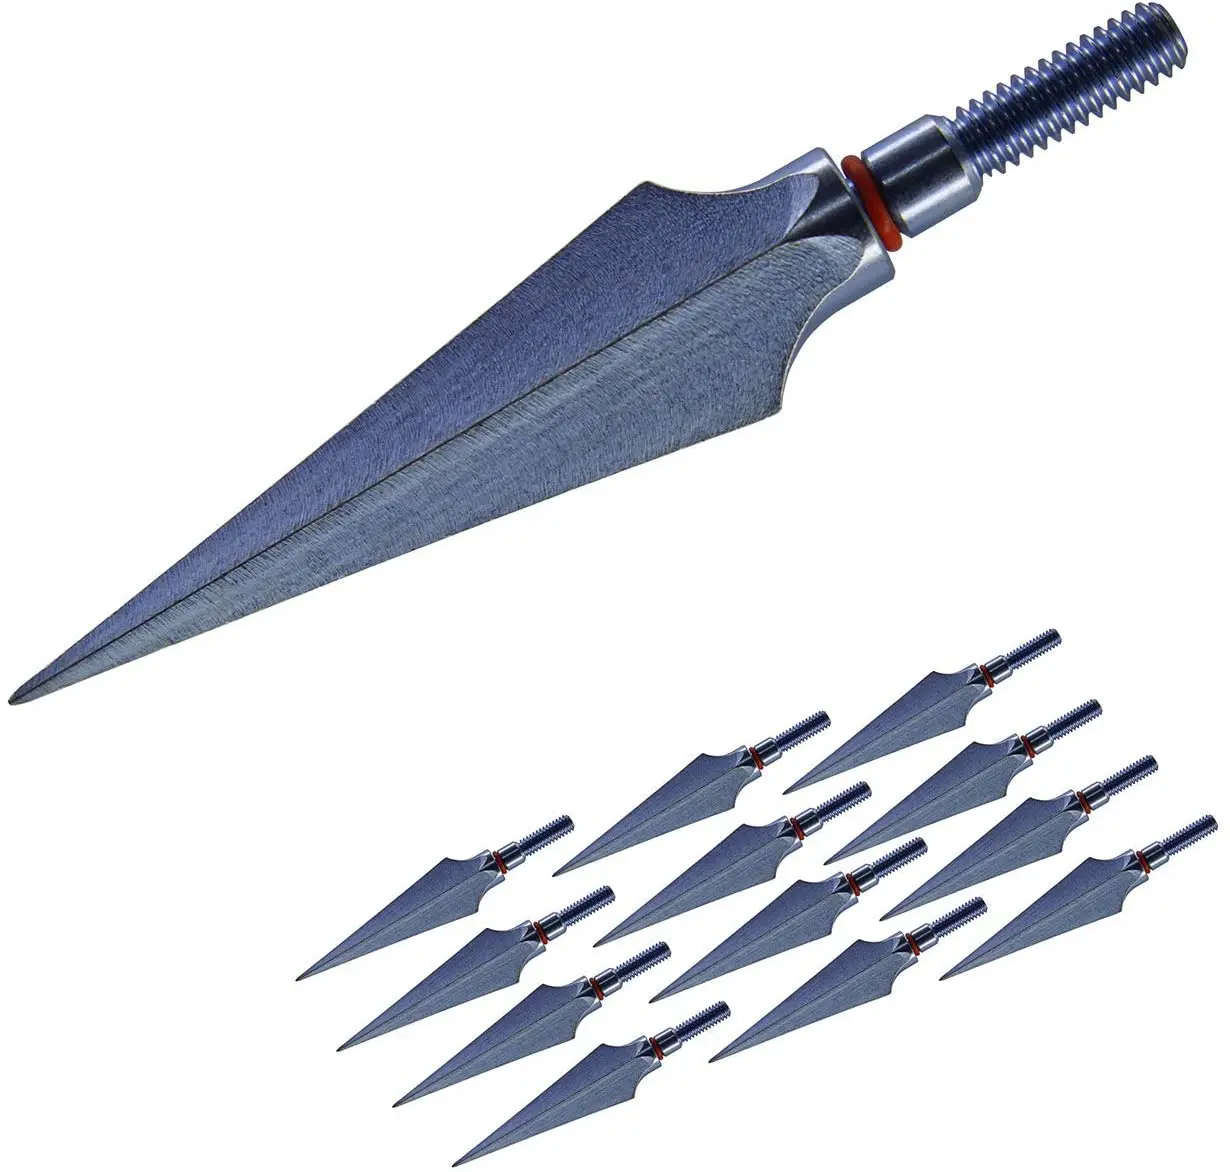 150Grain Archery Field Points Target Practice Broadheads for Bow Hunting 12 pack